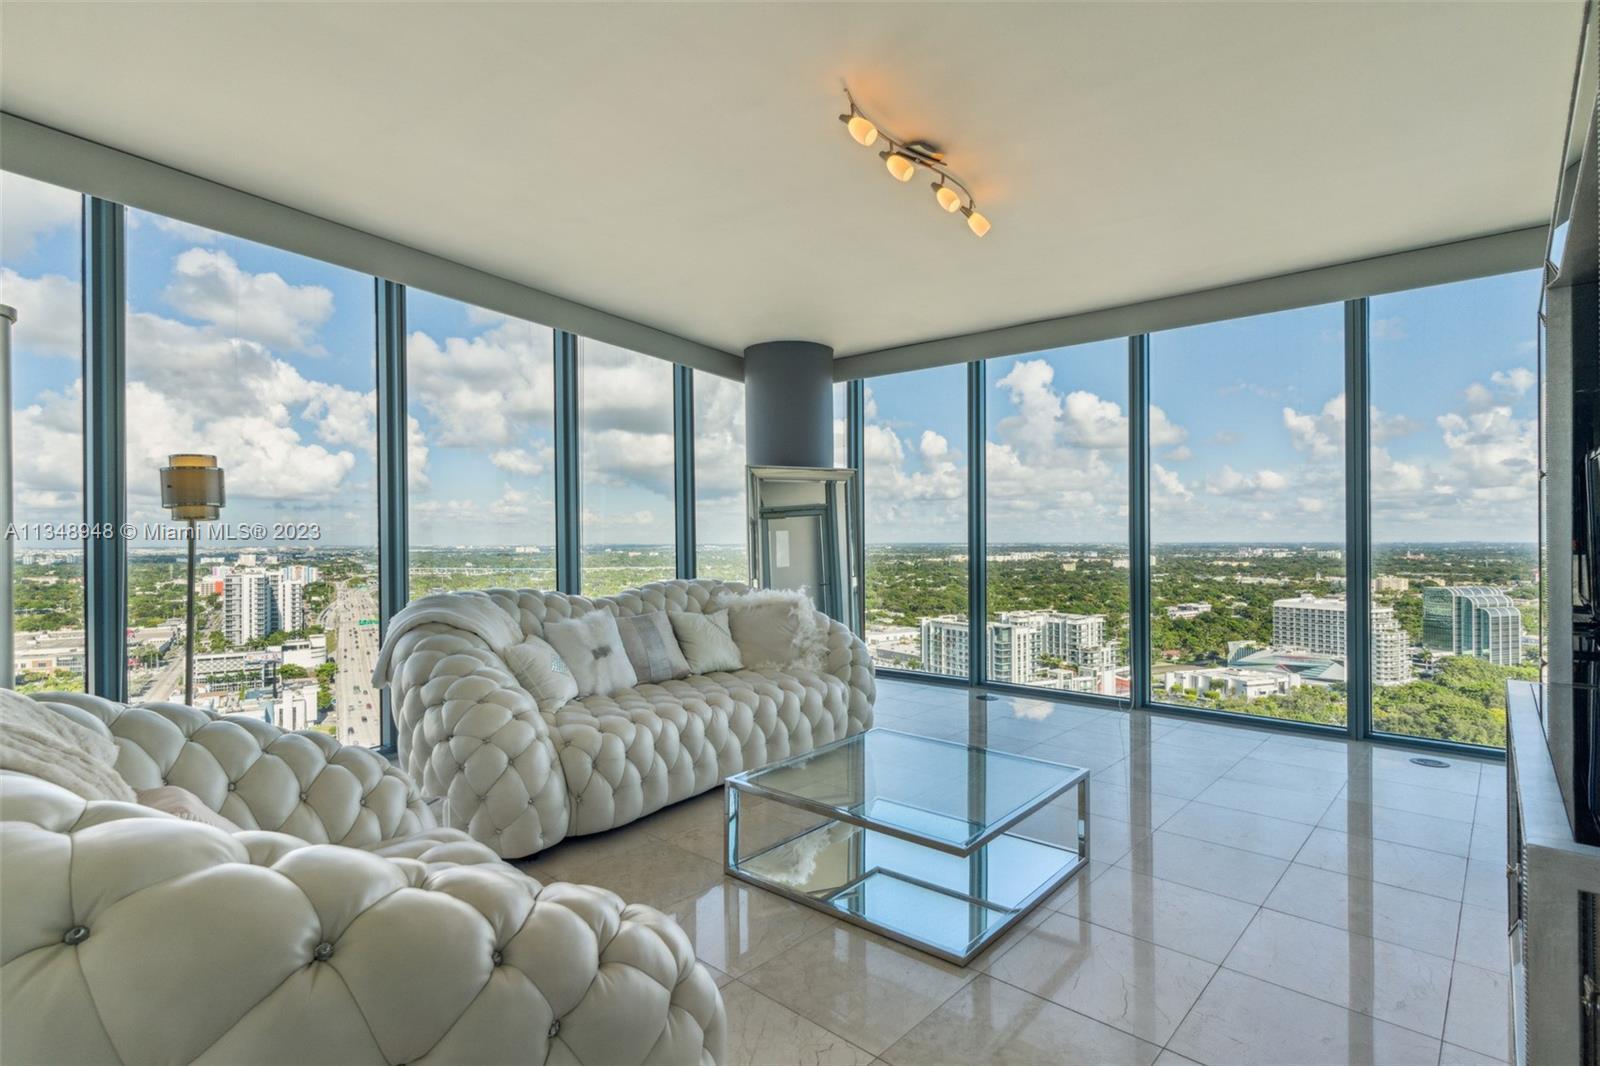 Welcome home to this stunning 2 bed/2.5 bath unit with breathtaking, unobstructed water views in a s